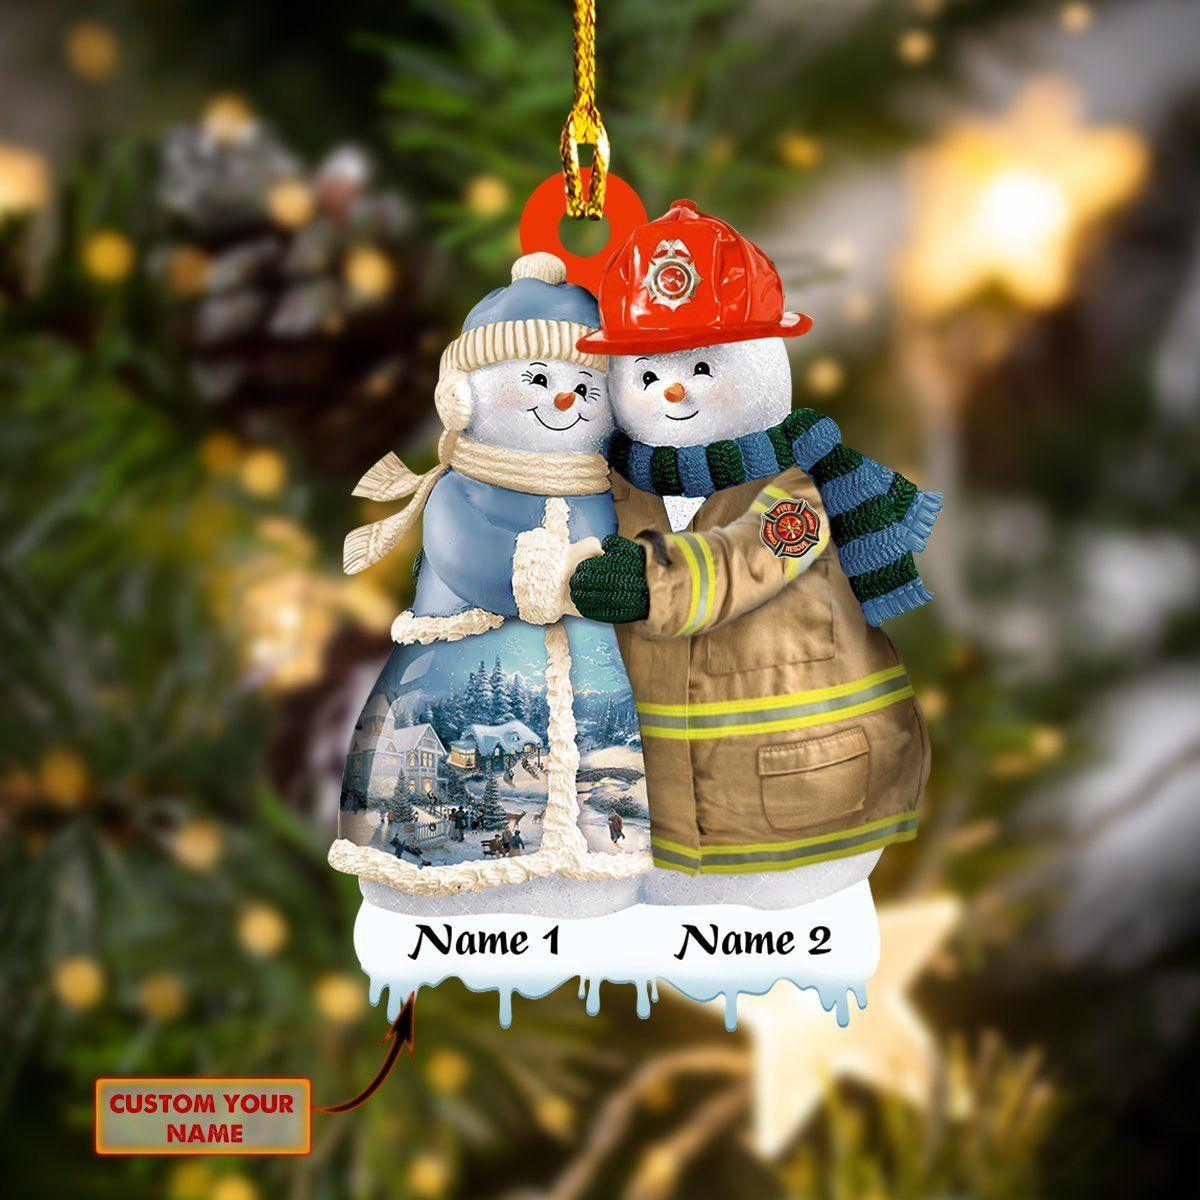 giftngon - Personalized Firefighter Snowman Christmas Ornament | Custom Shaped Ornament | Custom Name New